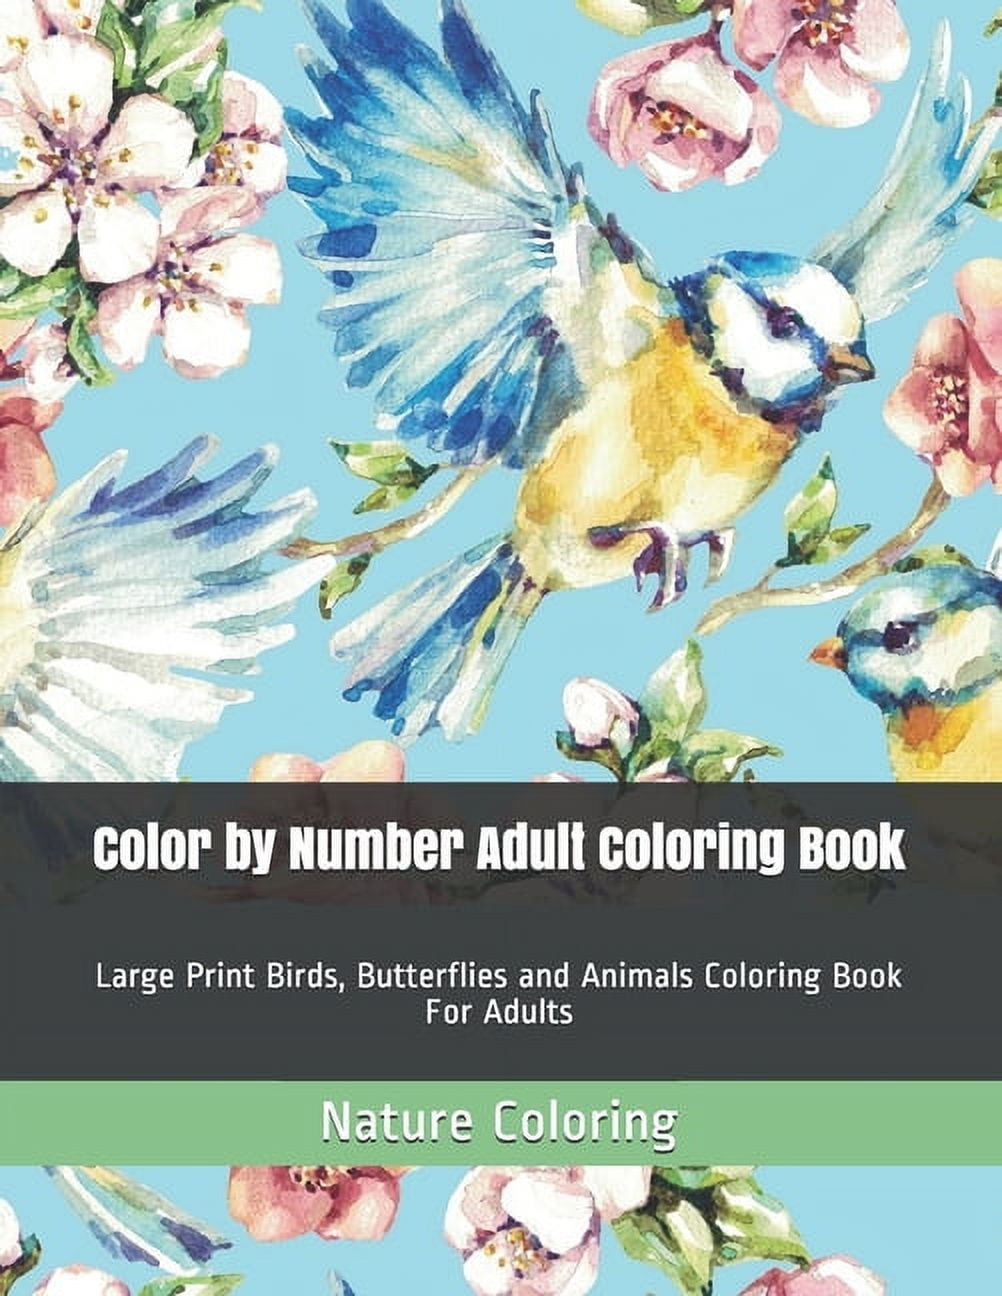 Color by Number Adult Coloring Book: Large Print Birds, Butterflies and Animals Coloring Book For Adults [Book]